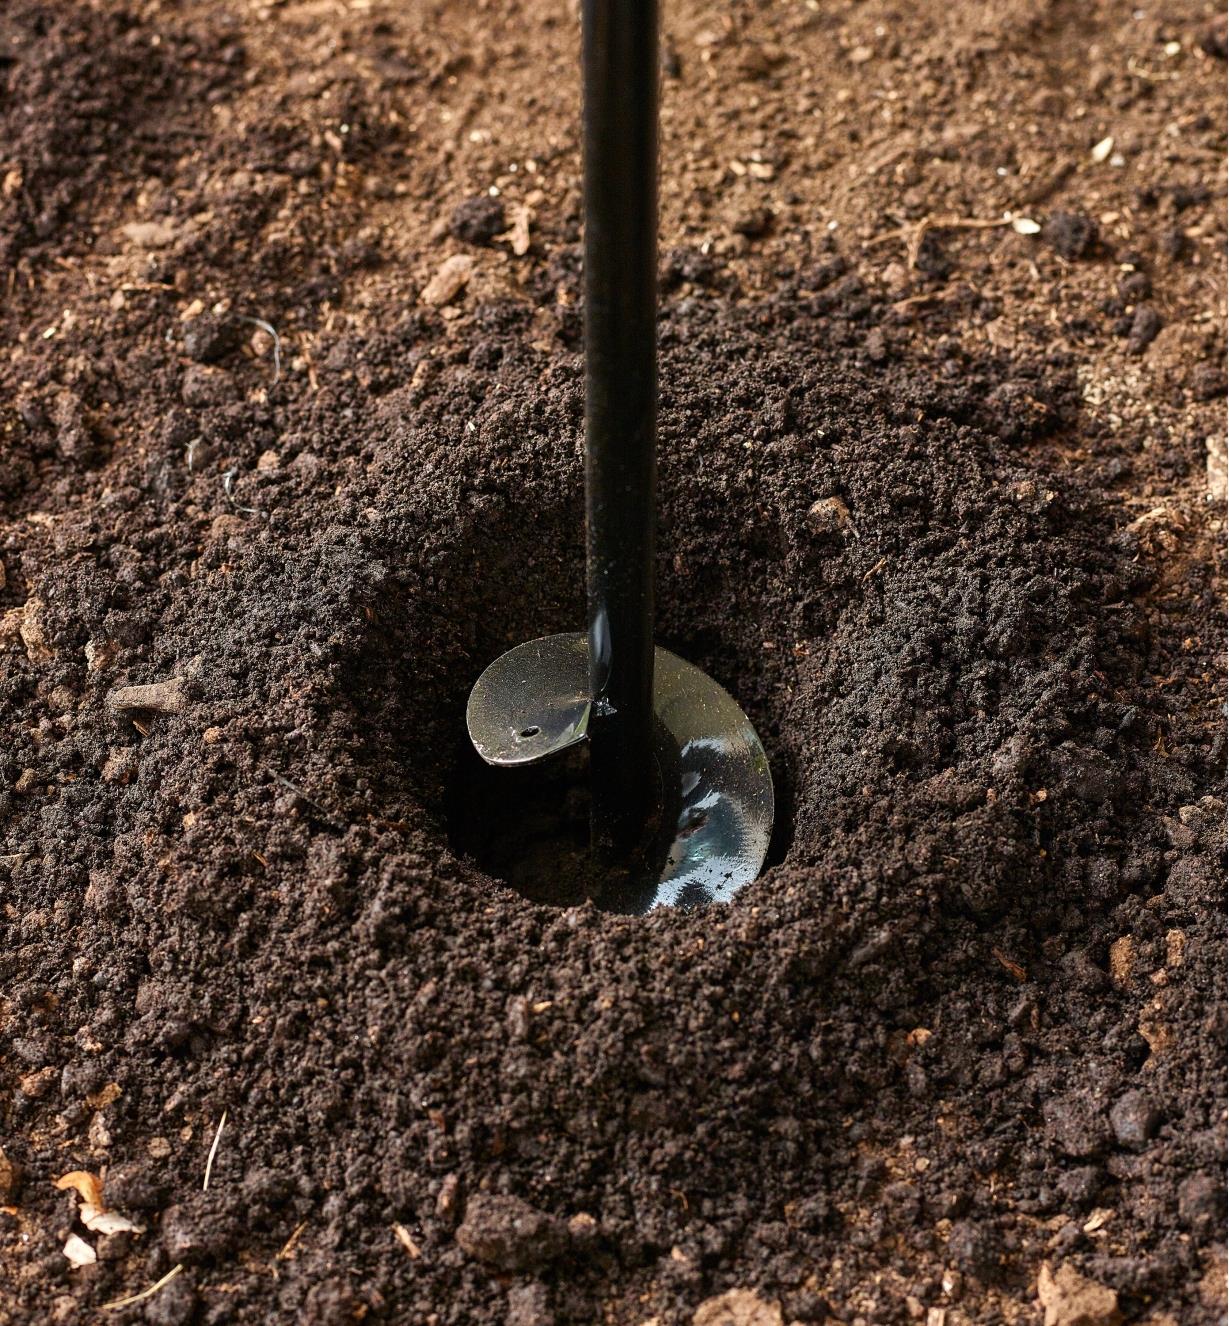 Close-up of garden auger drilling into soil